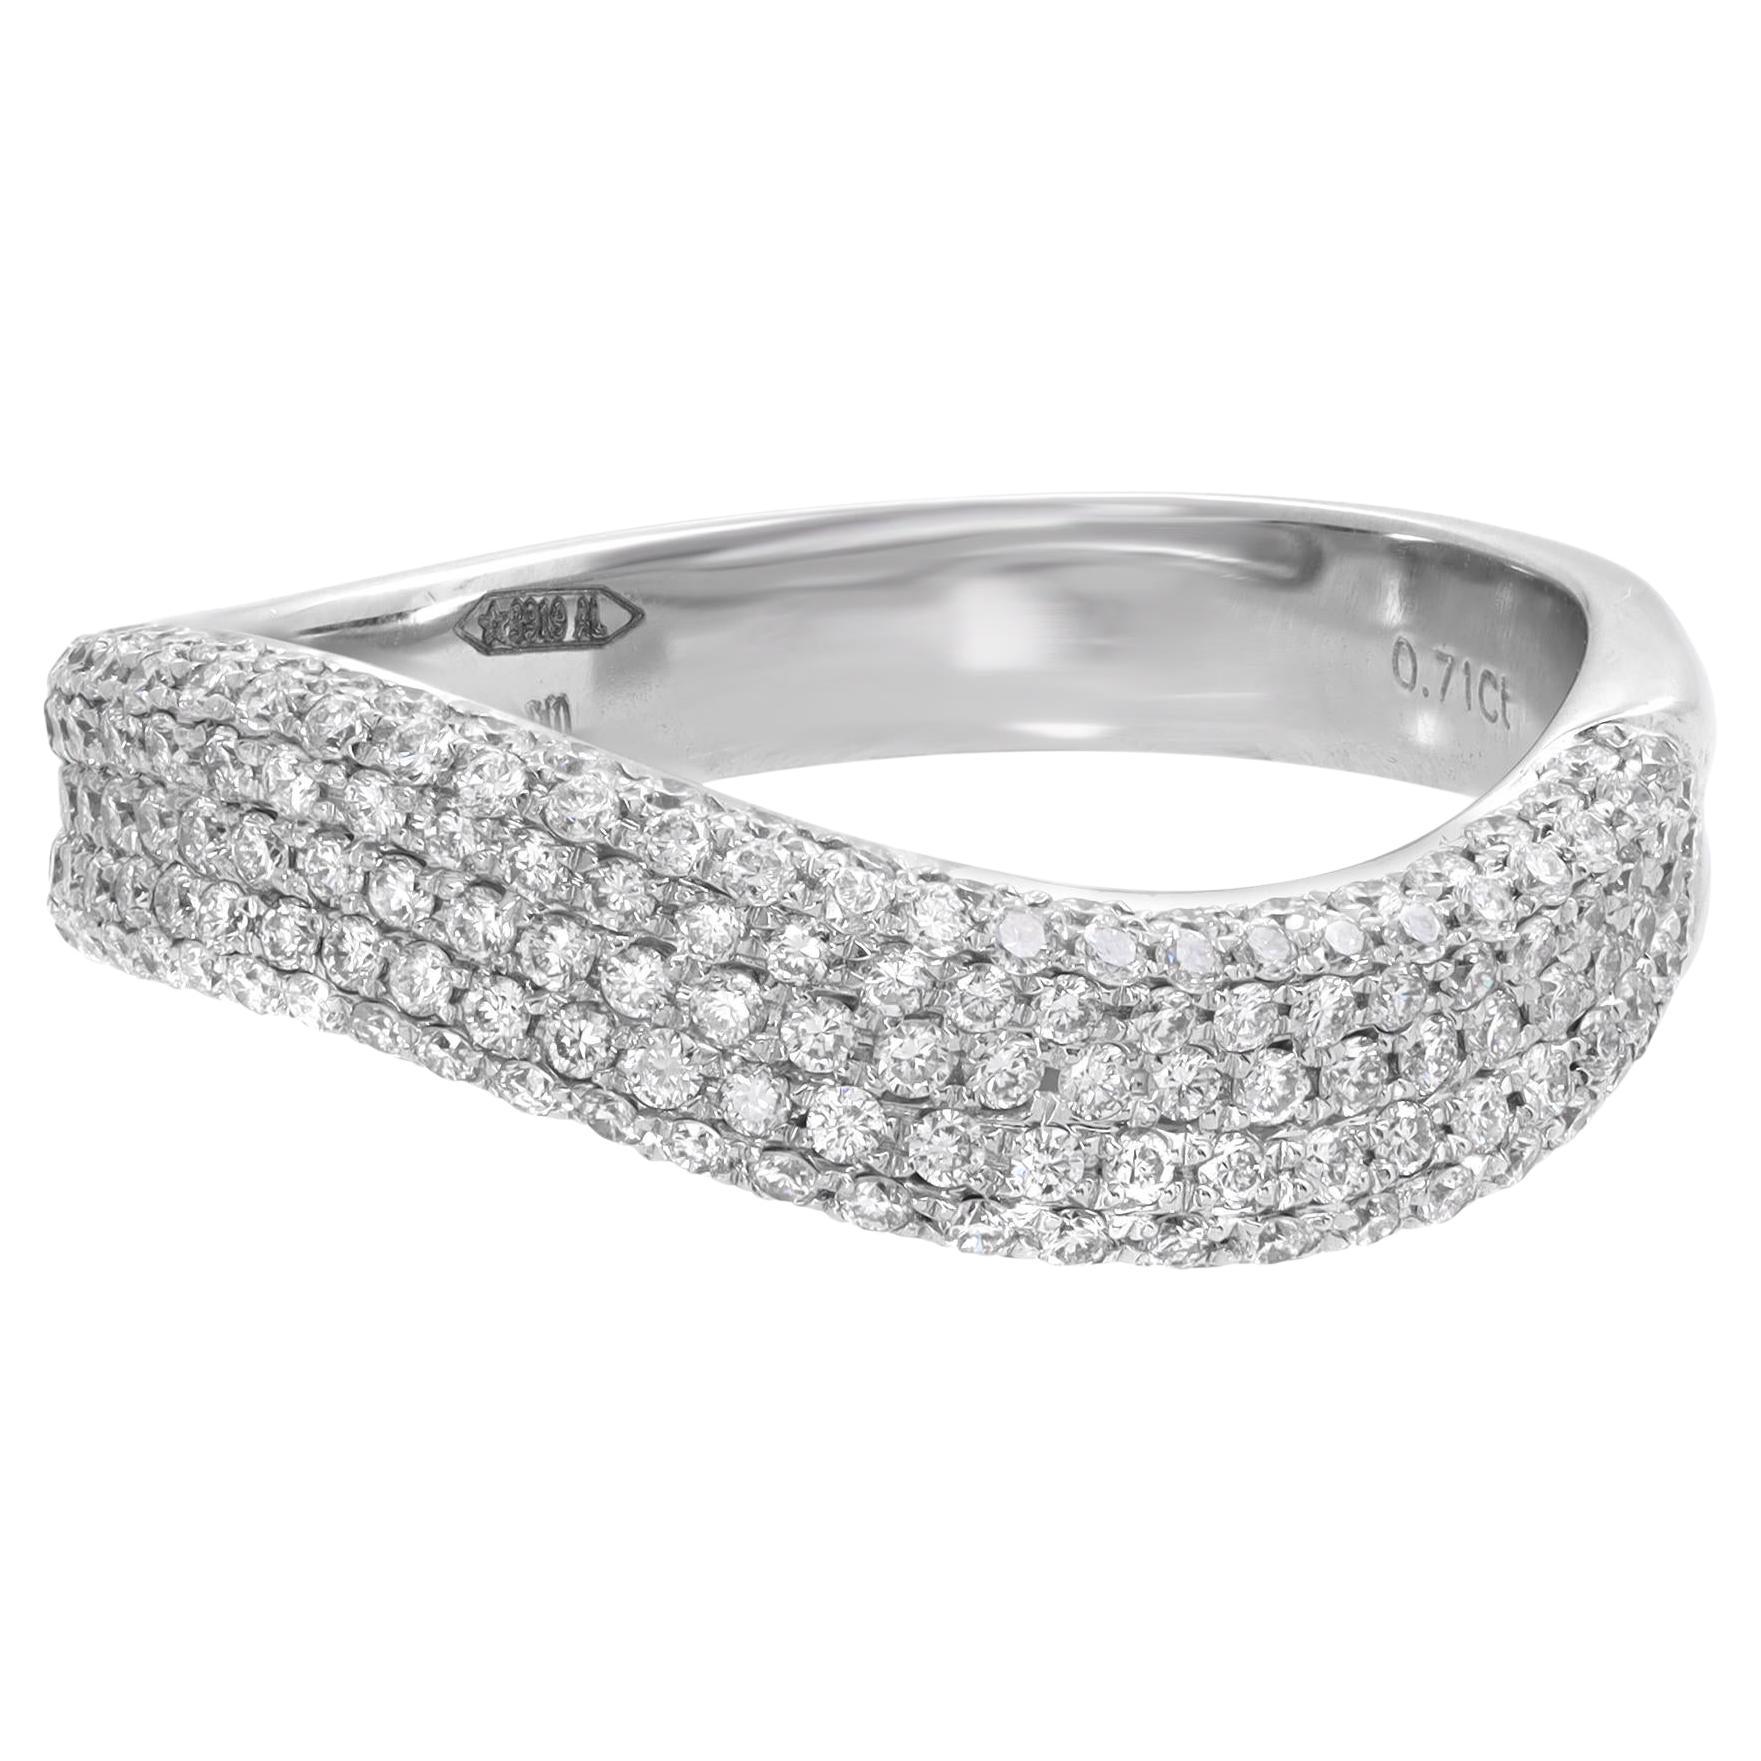 Piero Milano Natural Diamond Pave Curved Ring 18k White Gold 0.71 Cttw For Sale